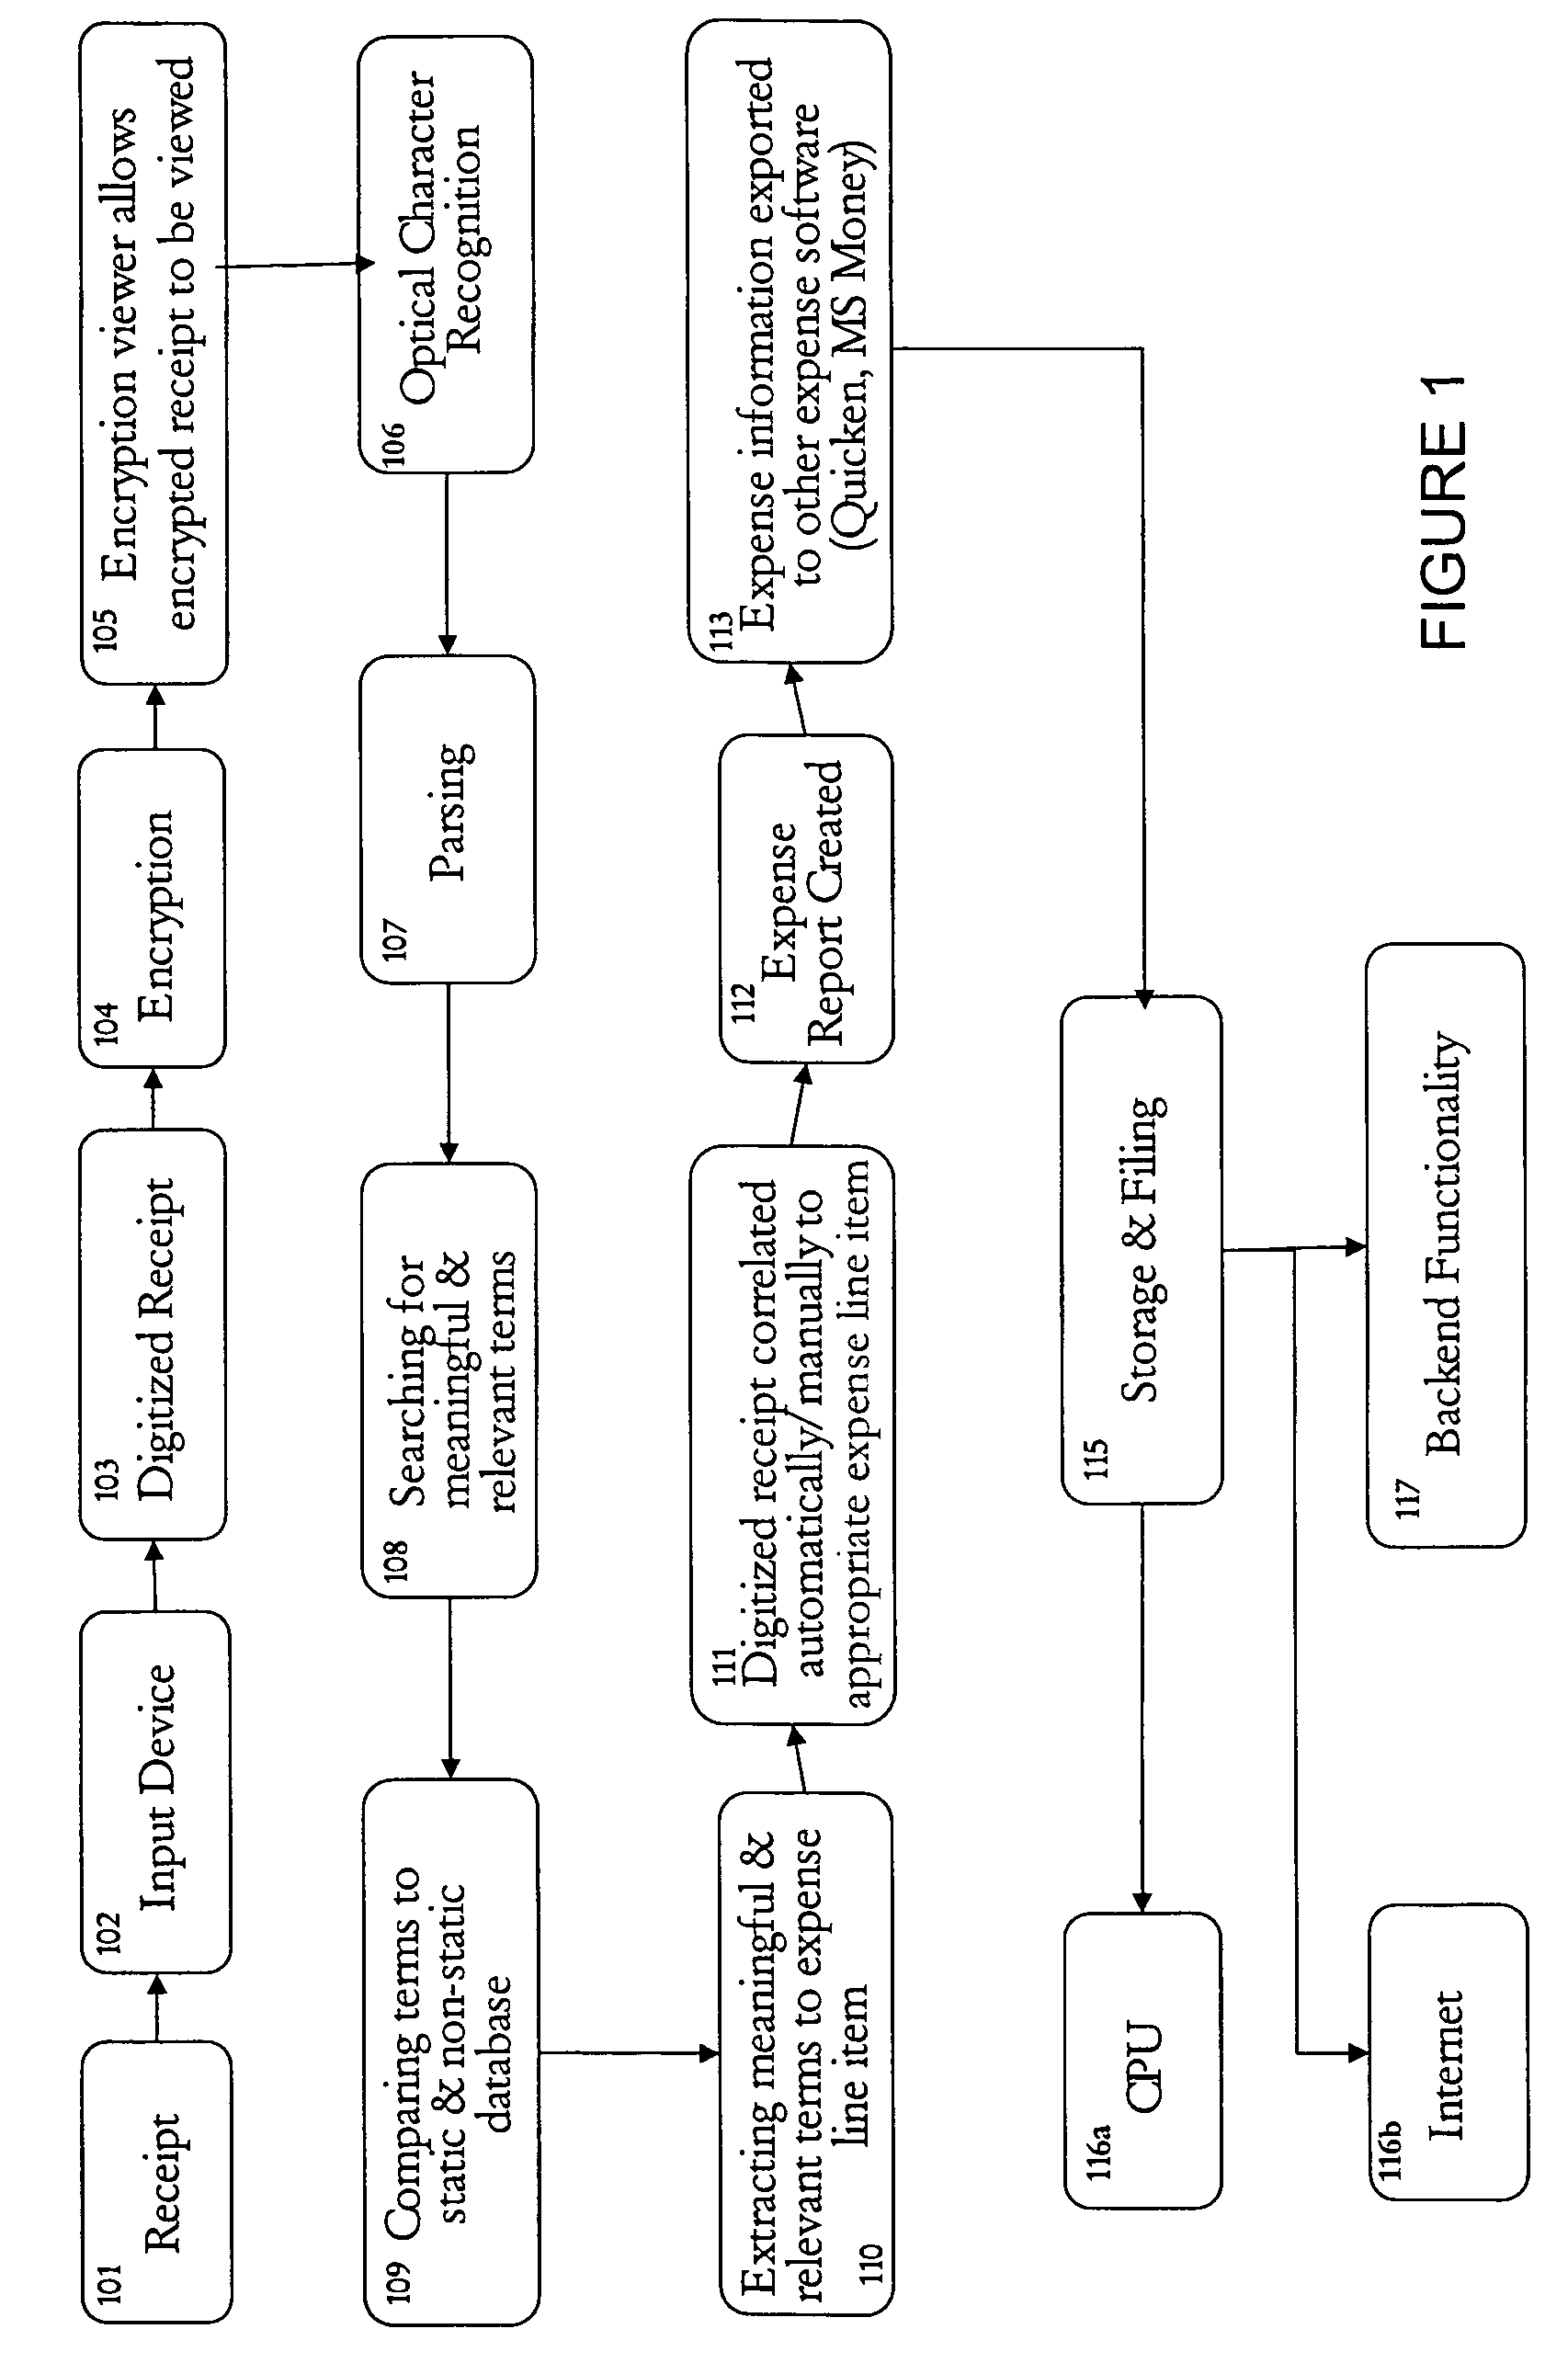 System and method for capture, storage and processing of receipts and related data